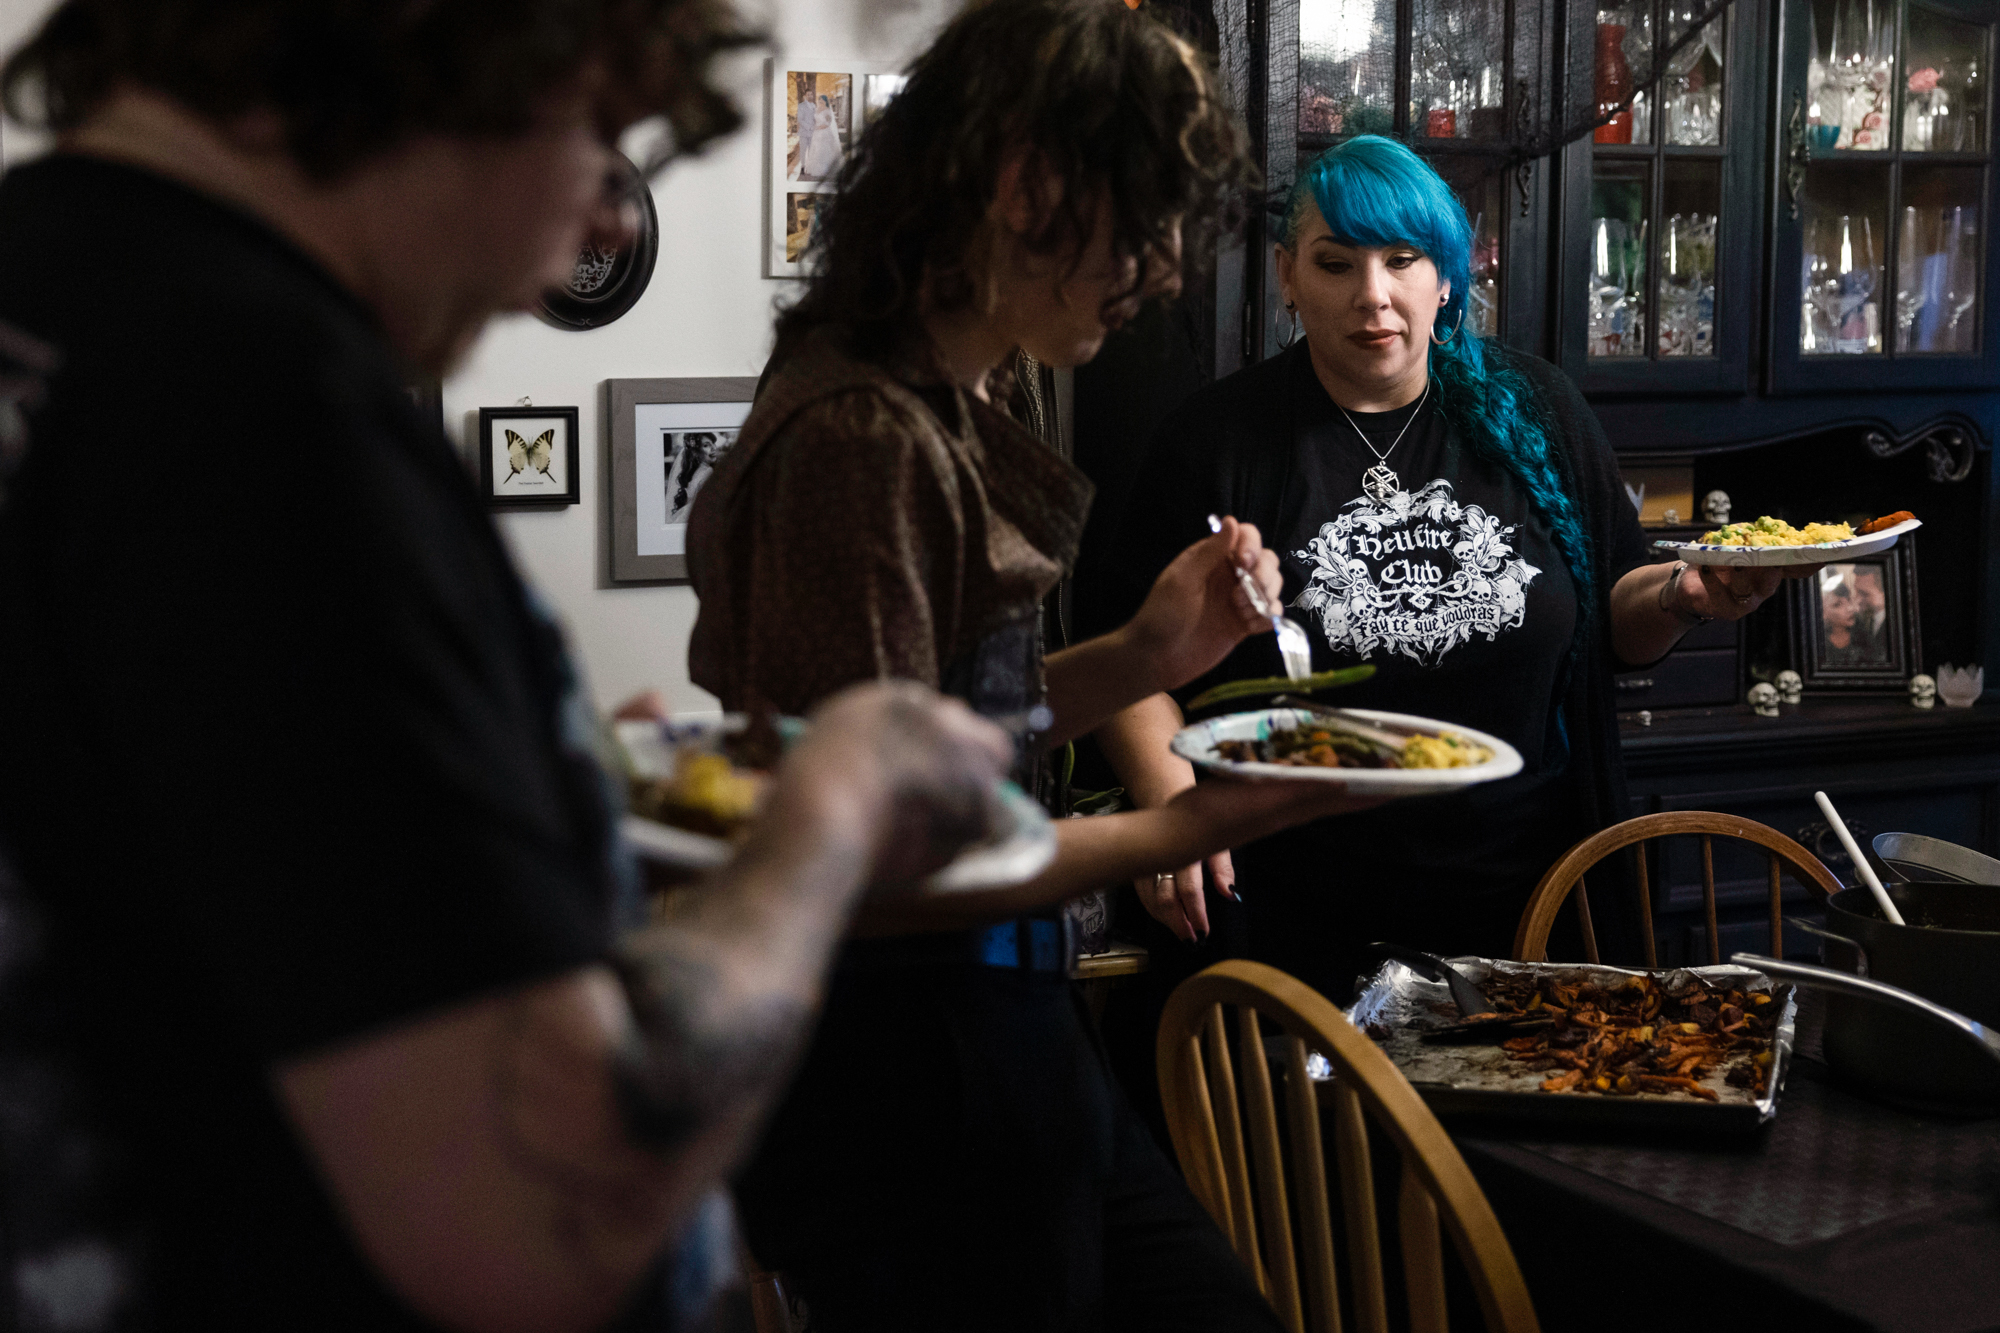 Two people serving themselves food on paper plates, and a woman with blue hair in the background.